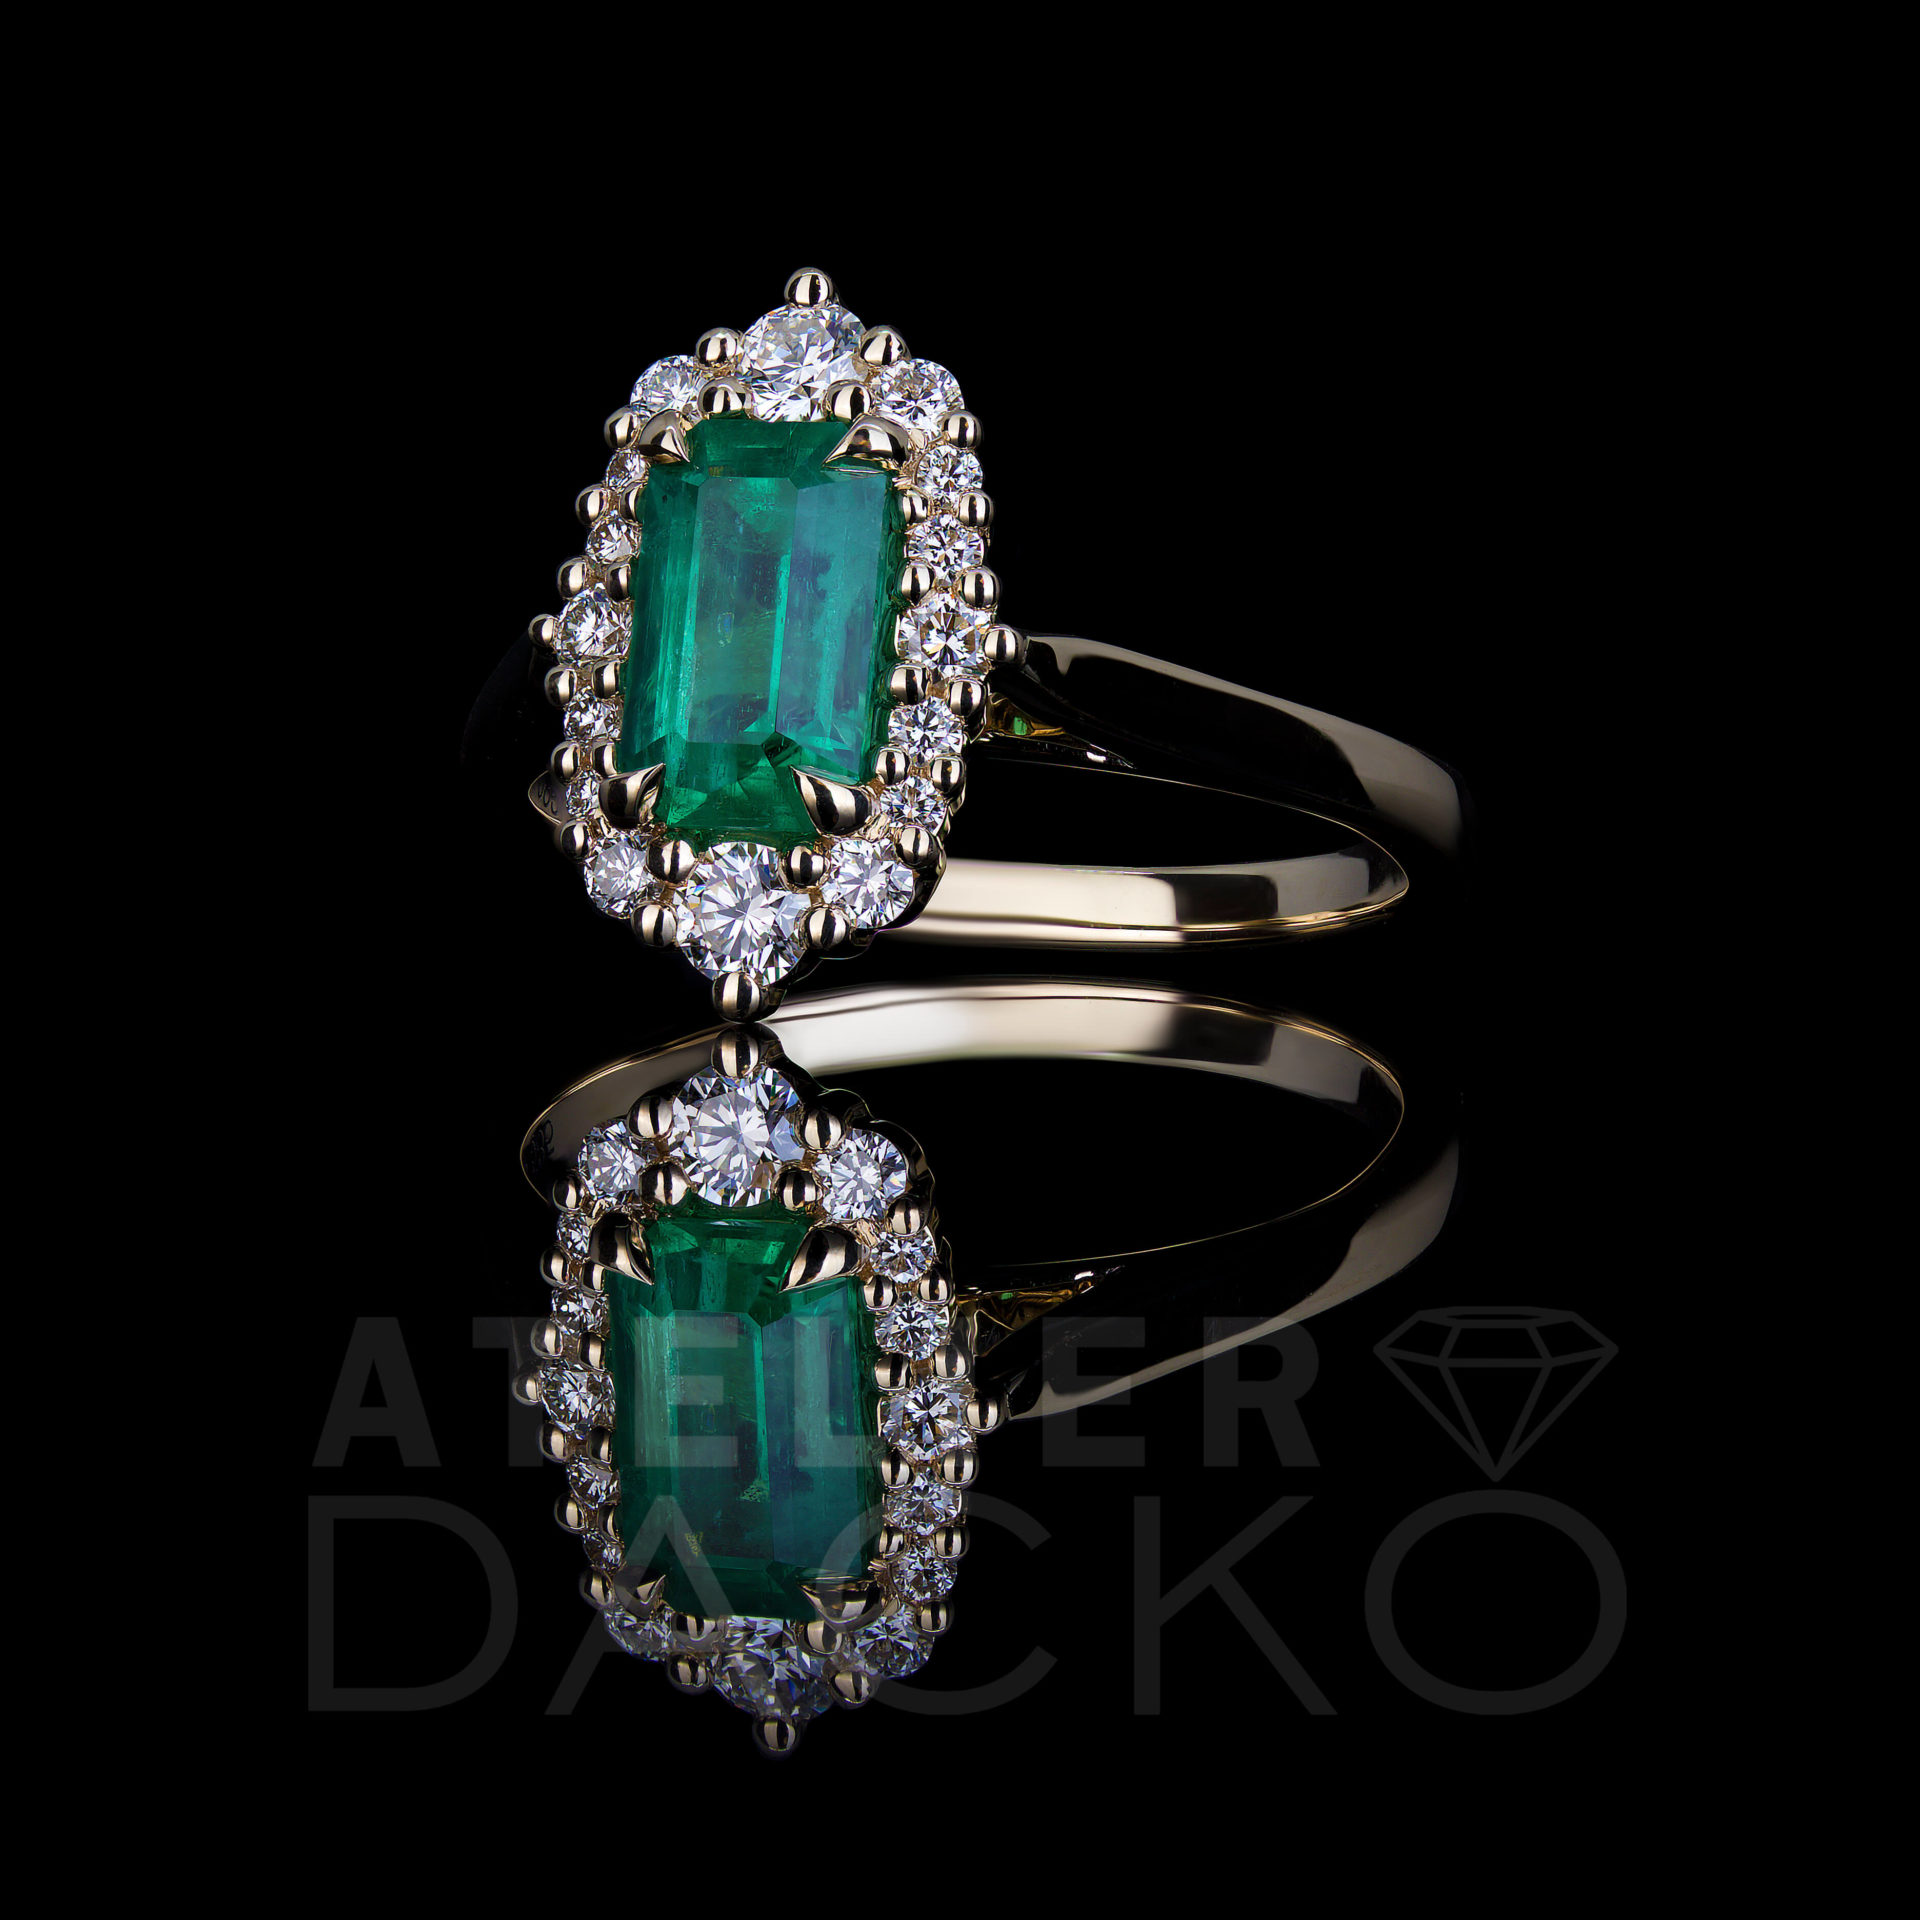 AD065-1.12 CT Emerald Ring with a Modern Vintage Diamond Halo-1